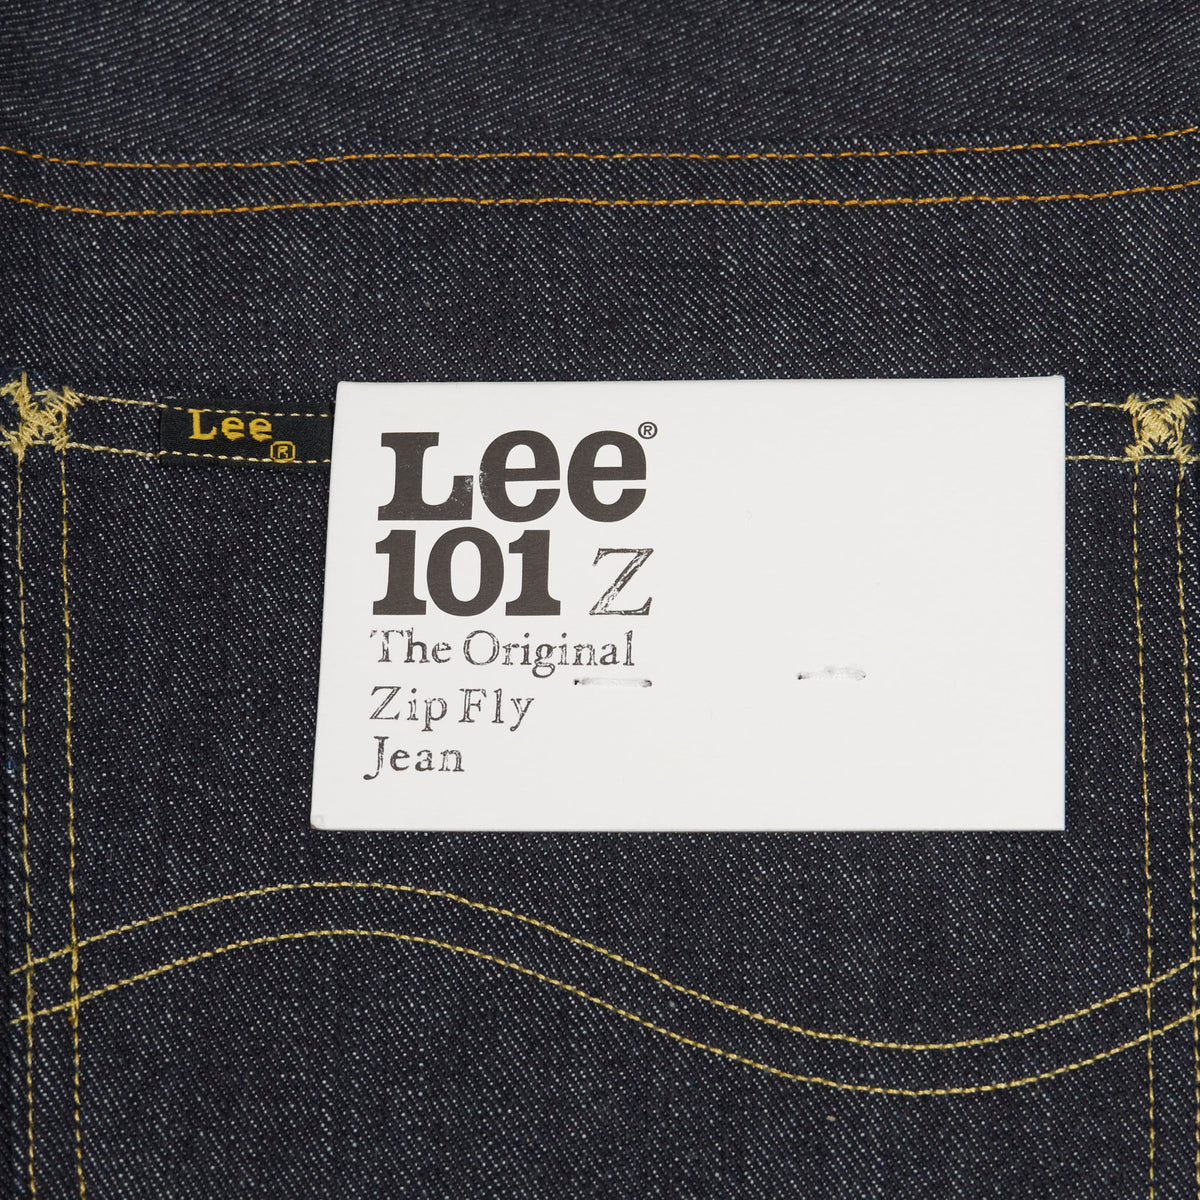 Lee 101 Z The Original Zip Fly Raw Selvage Denim Jeans